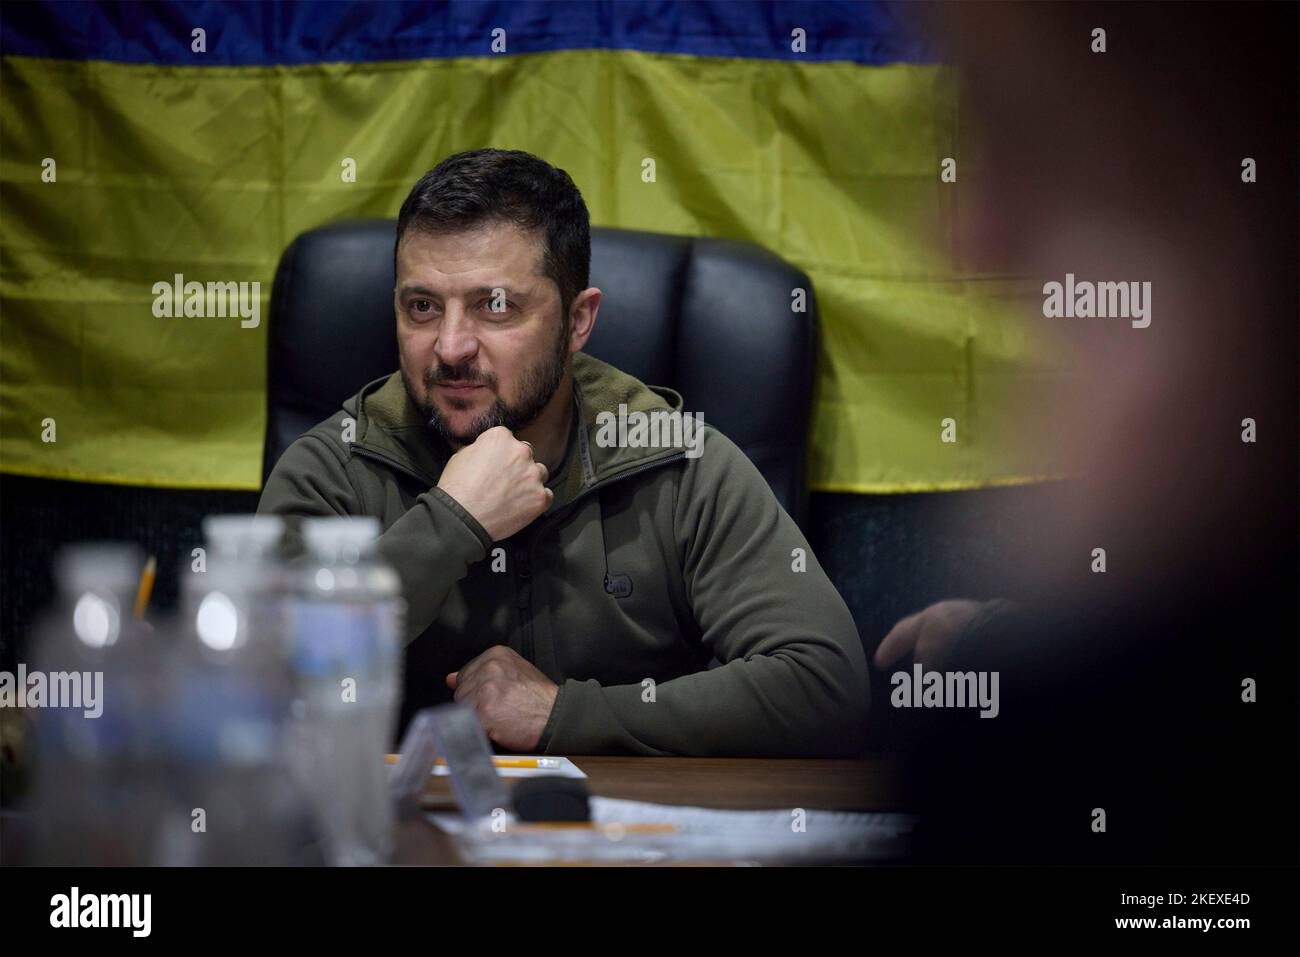 Mykolaiv, Ukraine. 14th Nov, 2022. Ukrainian President Volodymyr Zelenskyy, left, listens during a meeting on stabilizing the humanitarian situation following the liberation of Mykolaiv and Kherson regions, November 14, 2022 in Mykolaiv, Ukraine. Zelenskyy visited the city retaken from Russian occupation in a blow to President Vladimir Putin. Credit: Ukraine Presidency/Ukrainian Presidential Press Office/Alamy Live News Stock Photo